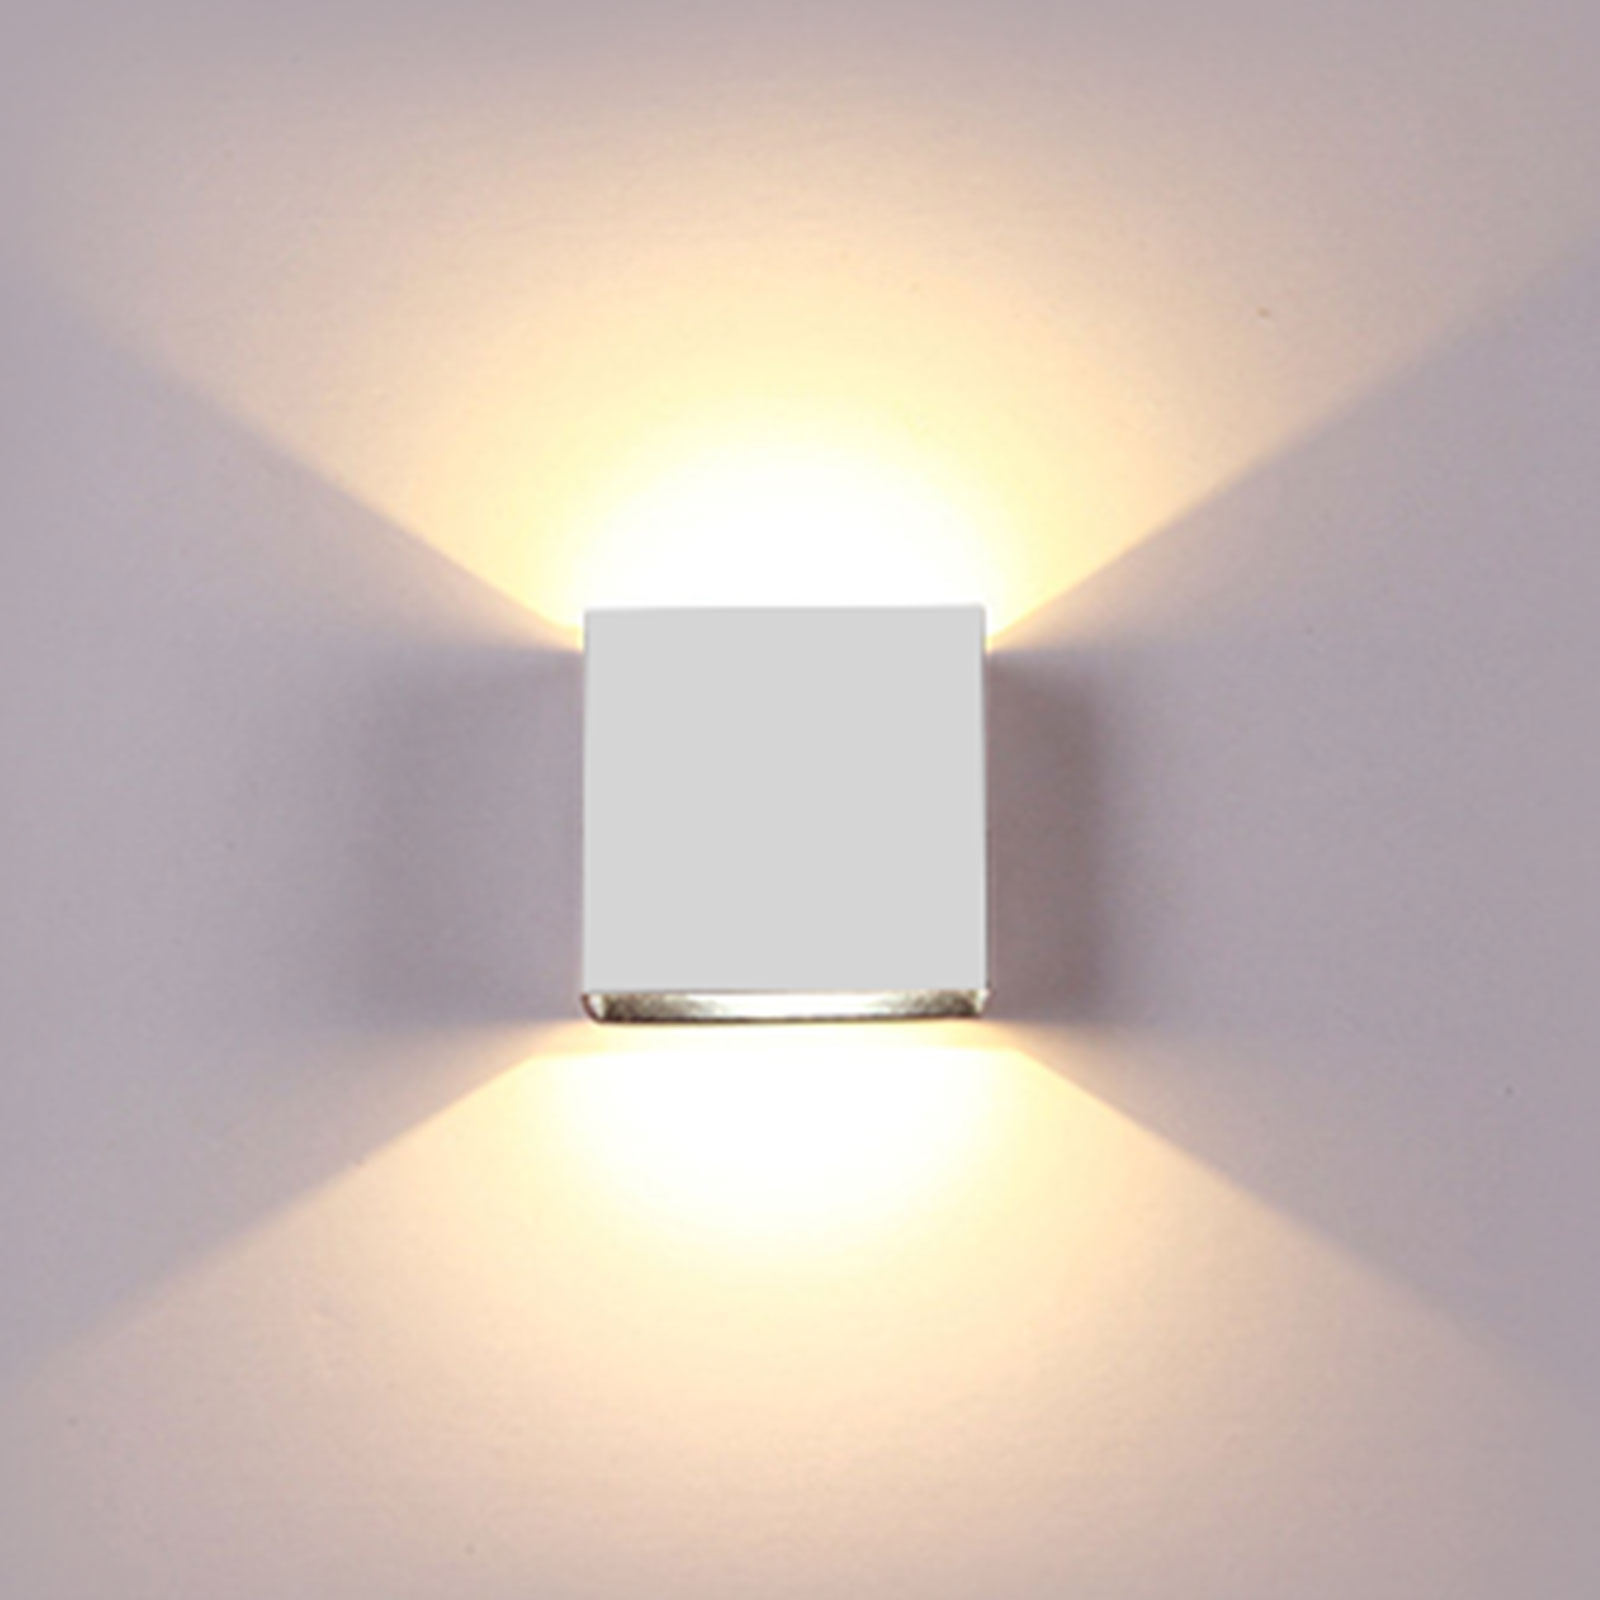 Details about   LED Indoor Outdoor Wall Light Sconce Up Down Lamp Room Garden Corridor  z g 